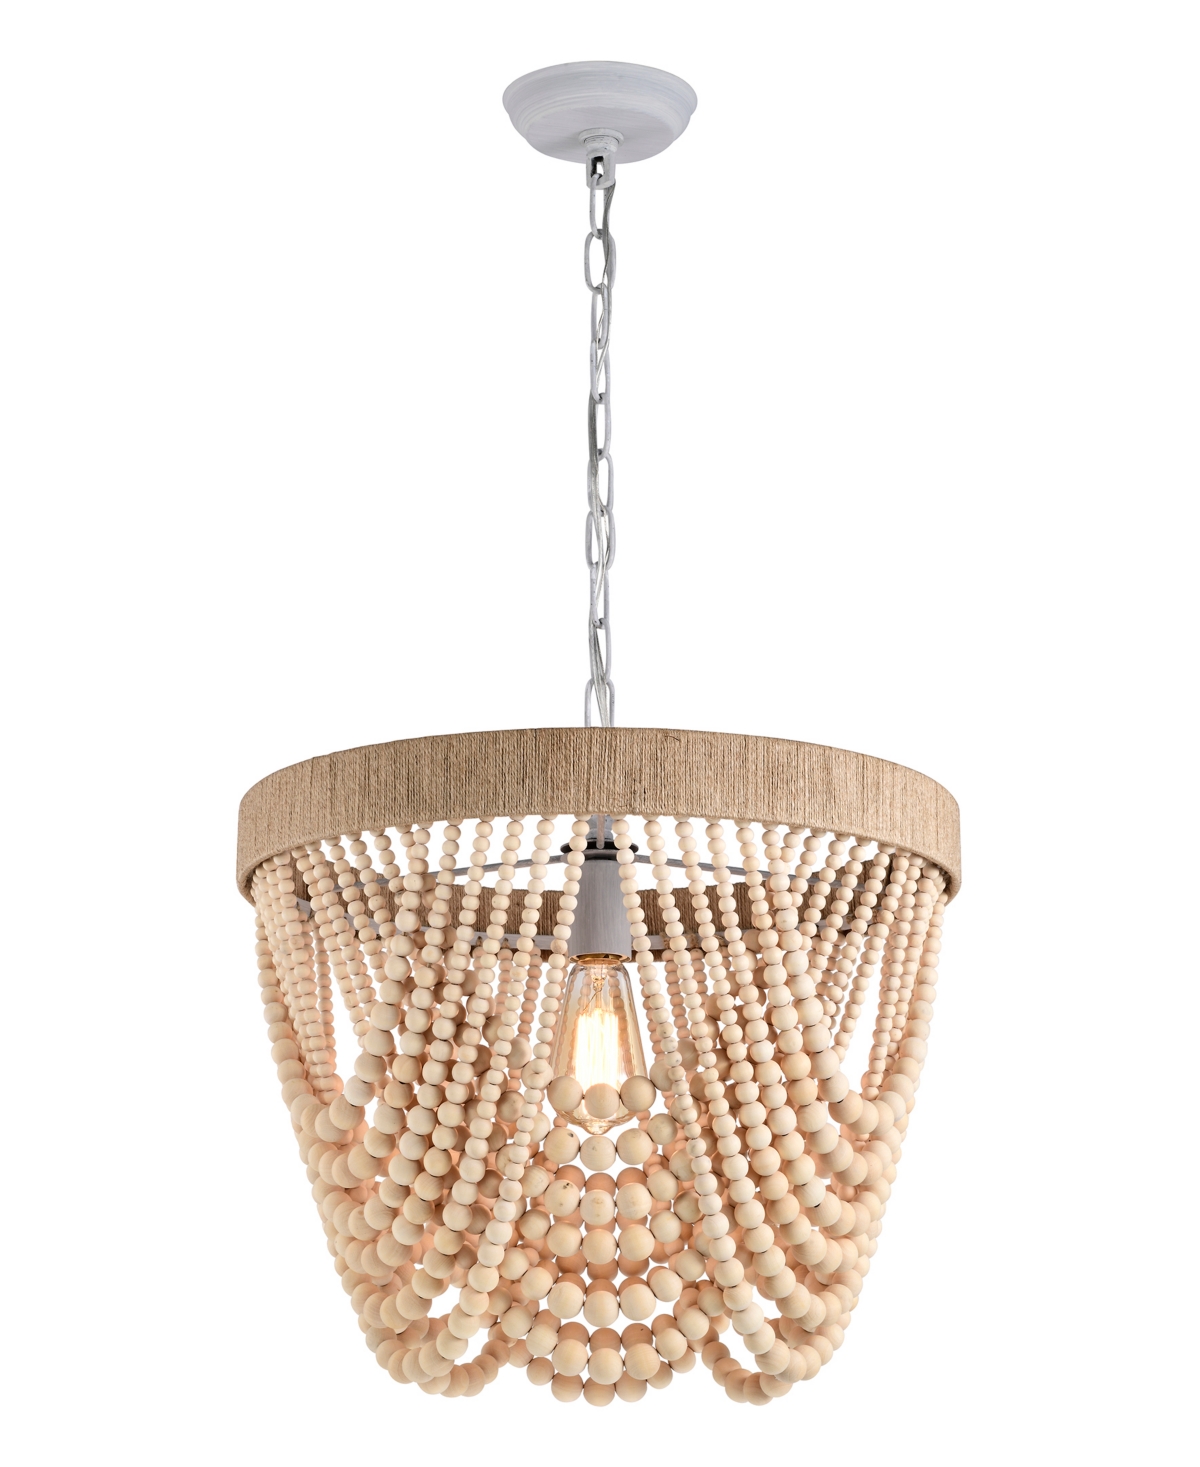 Home Accessories Elli 18" Indoor Finish Pendant With Light Kit In White And Light Brown